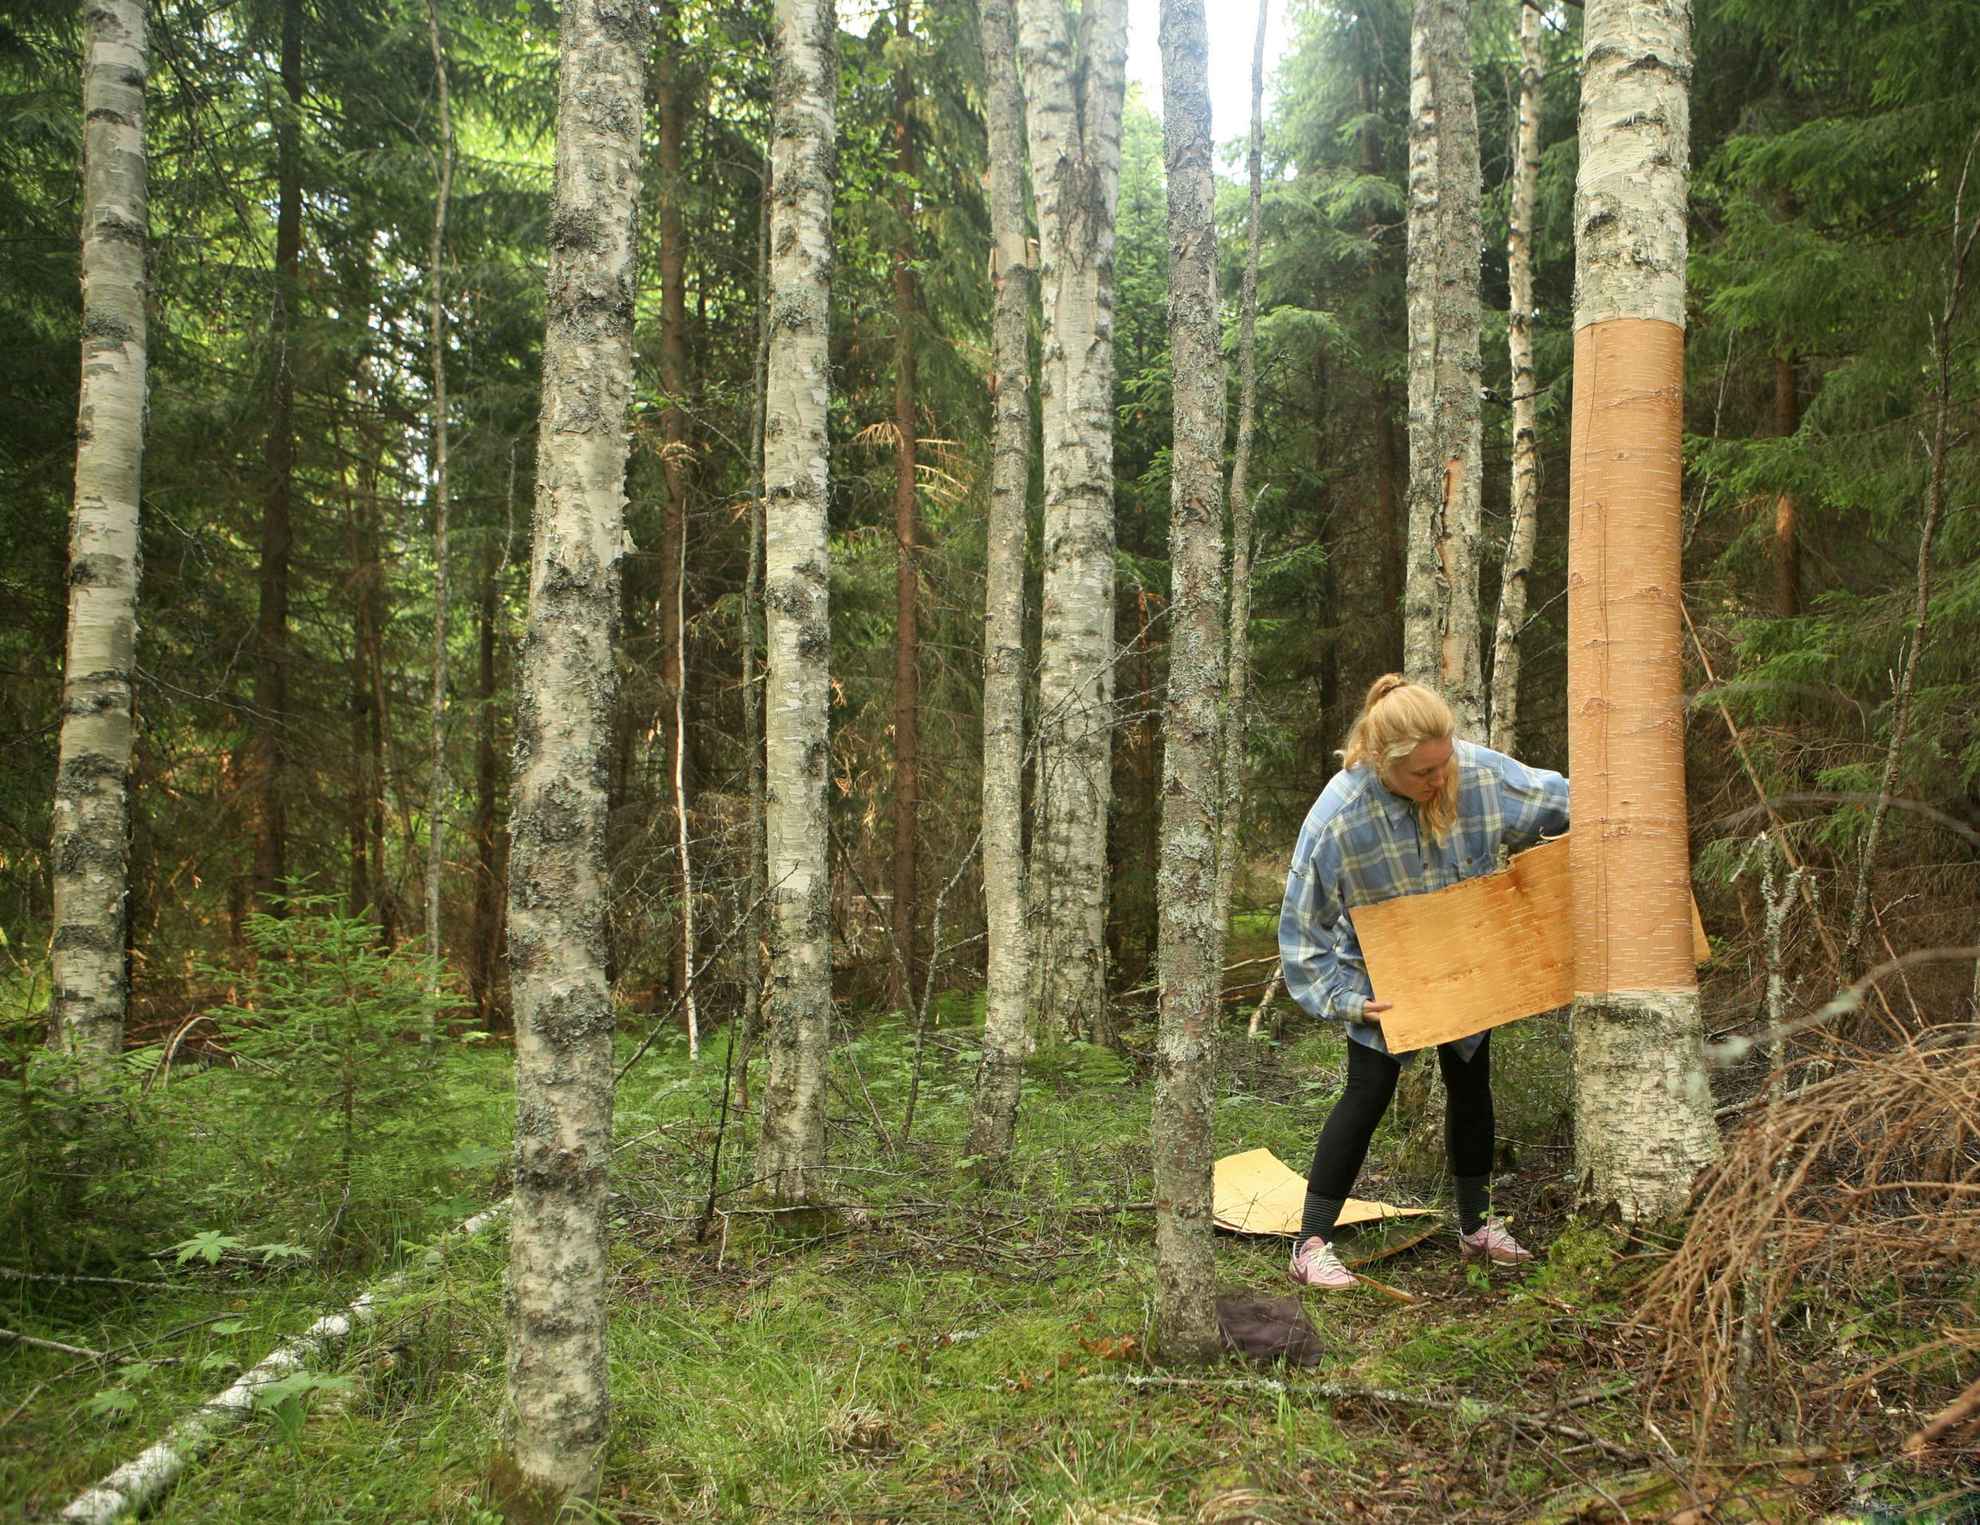 Ina  lush forest, a woman is tearing bark from a birch tree.